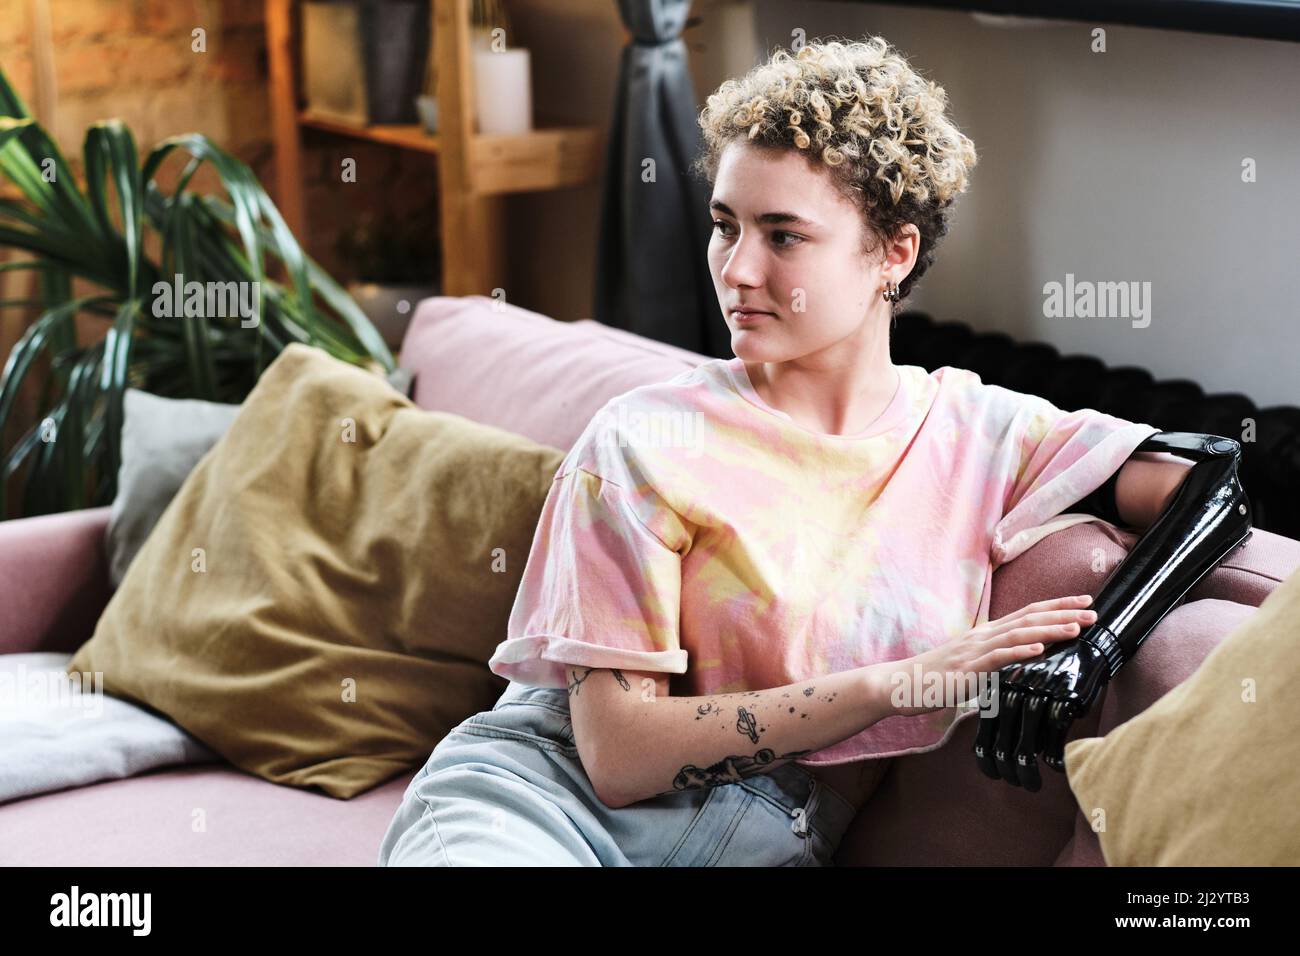 Young woman in casual clothing with prosthetic arm resting on sofa in living room Stock Photo